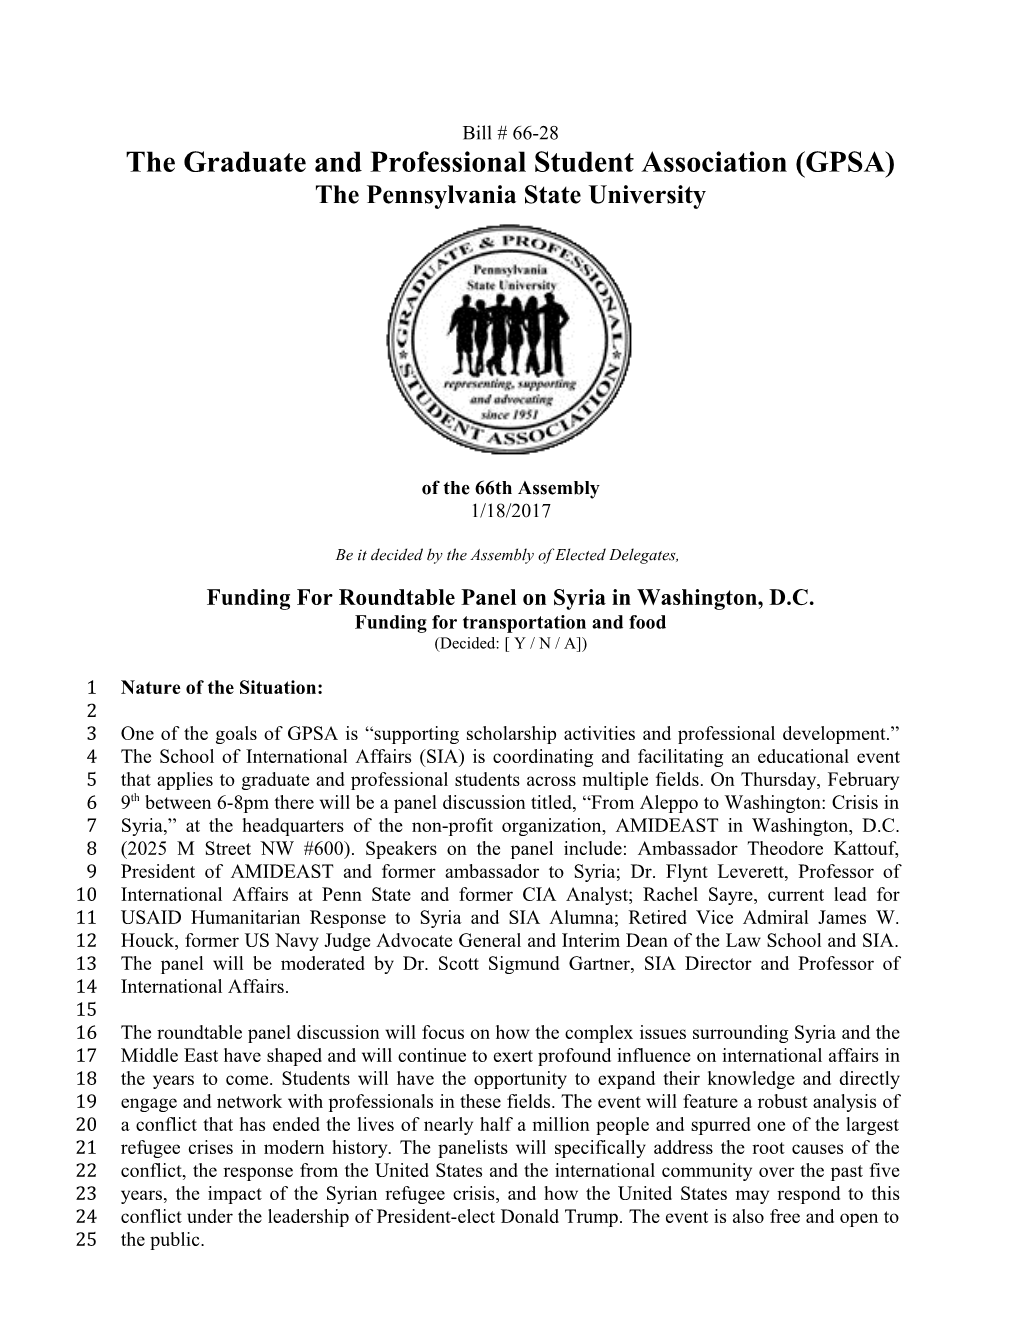 The Graduate and Professional Student Association (GPSA)